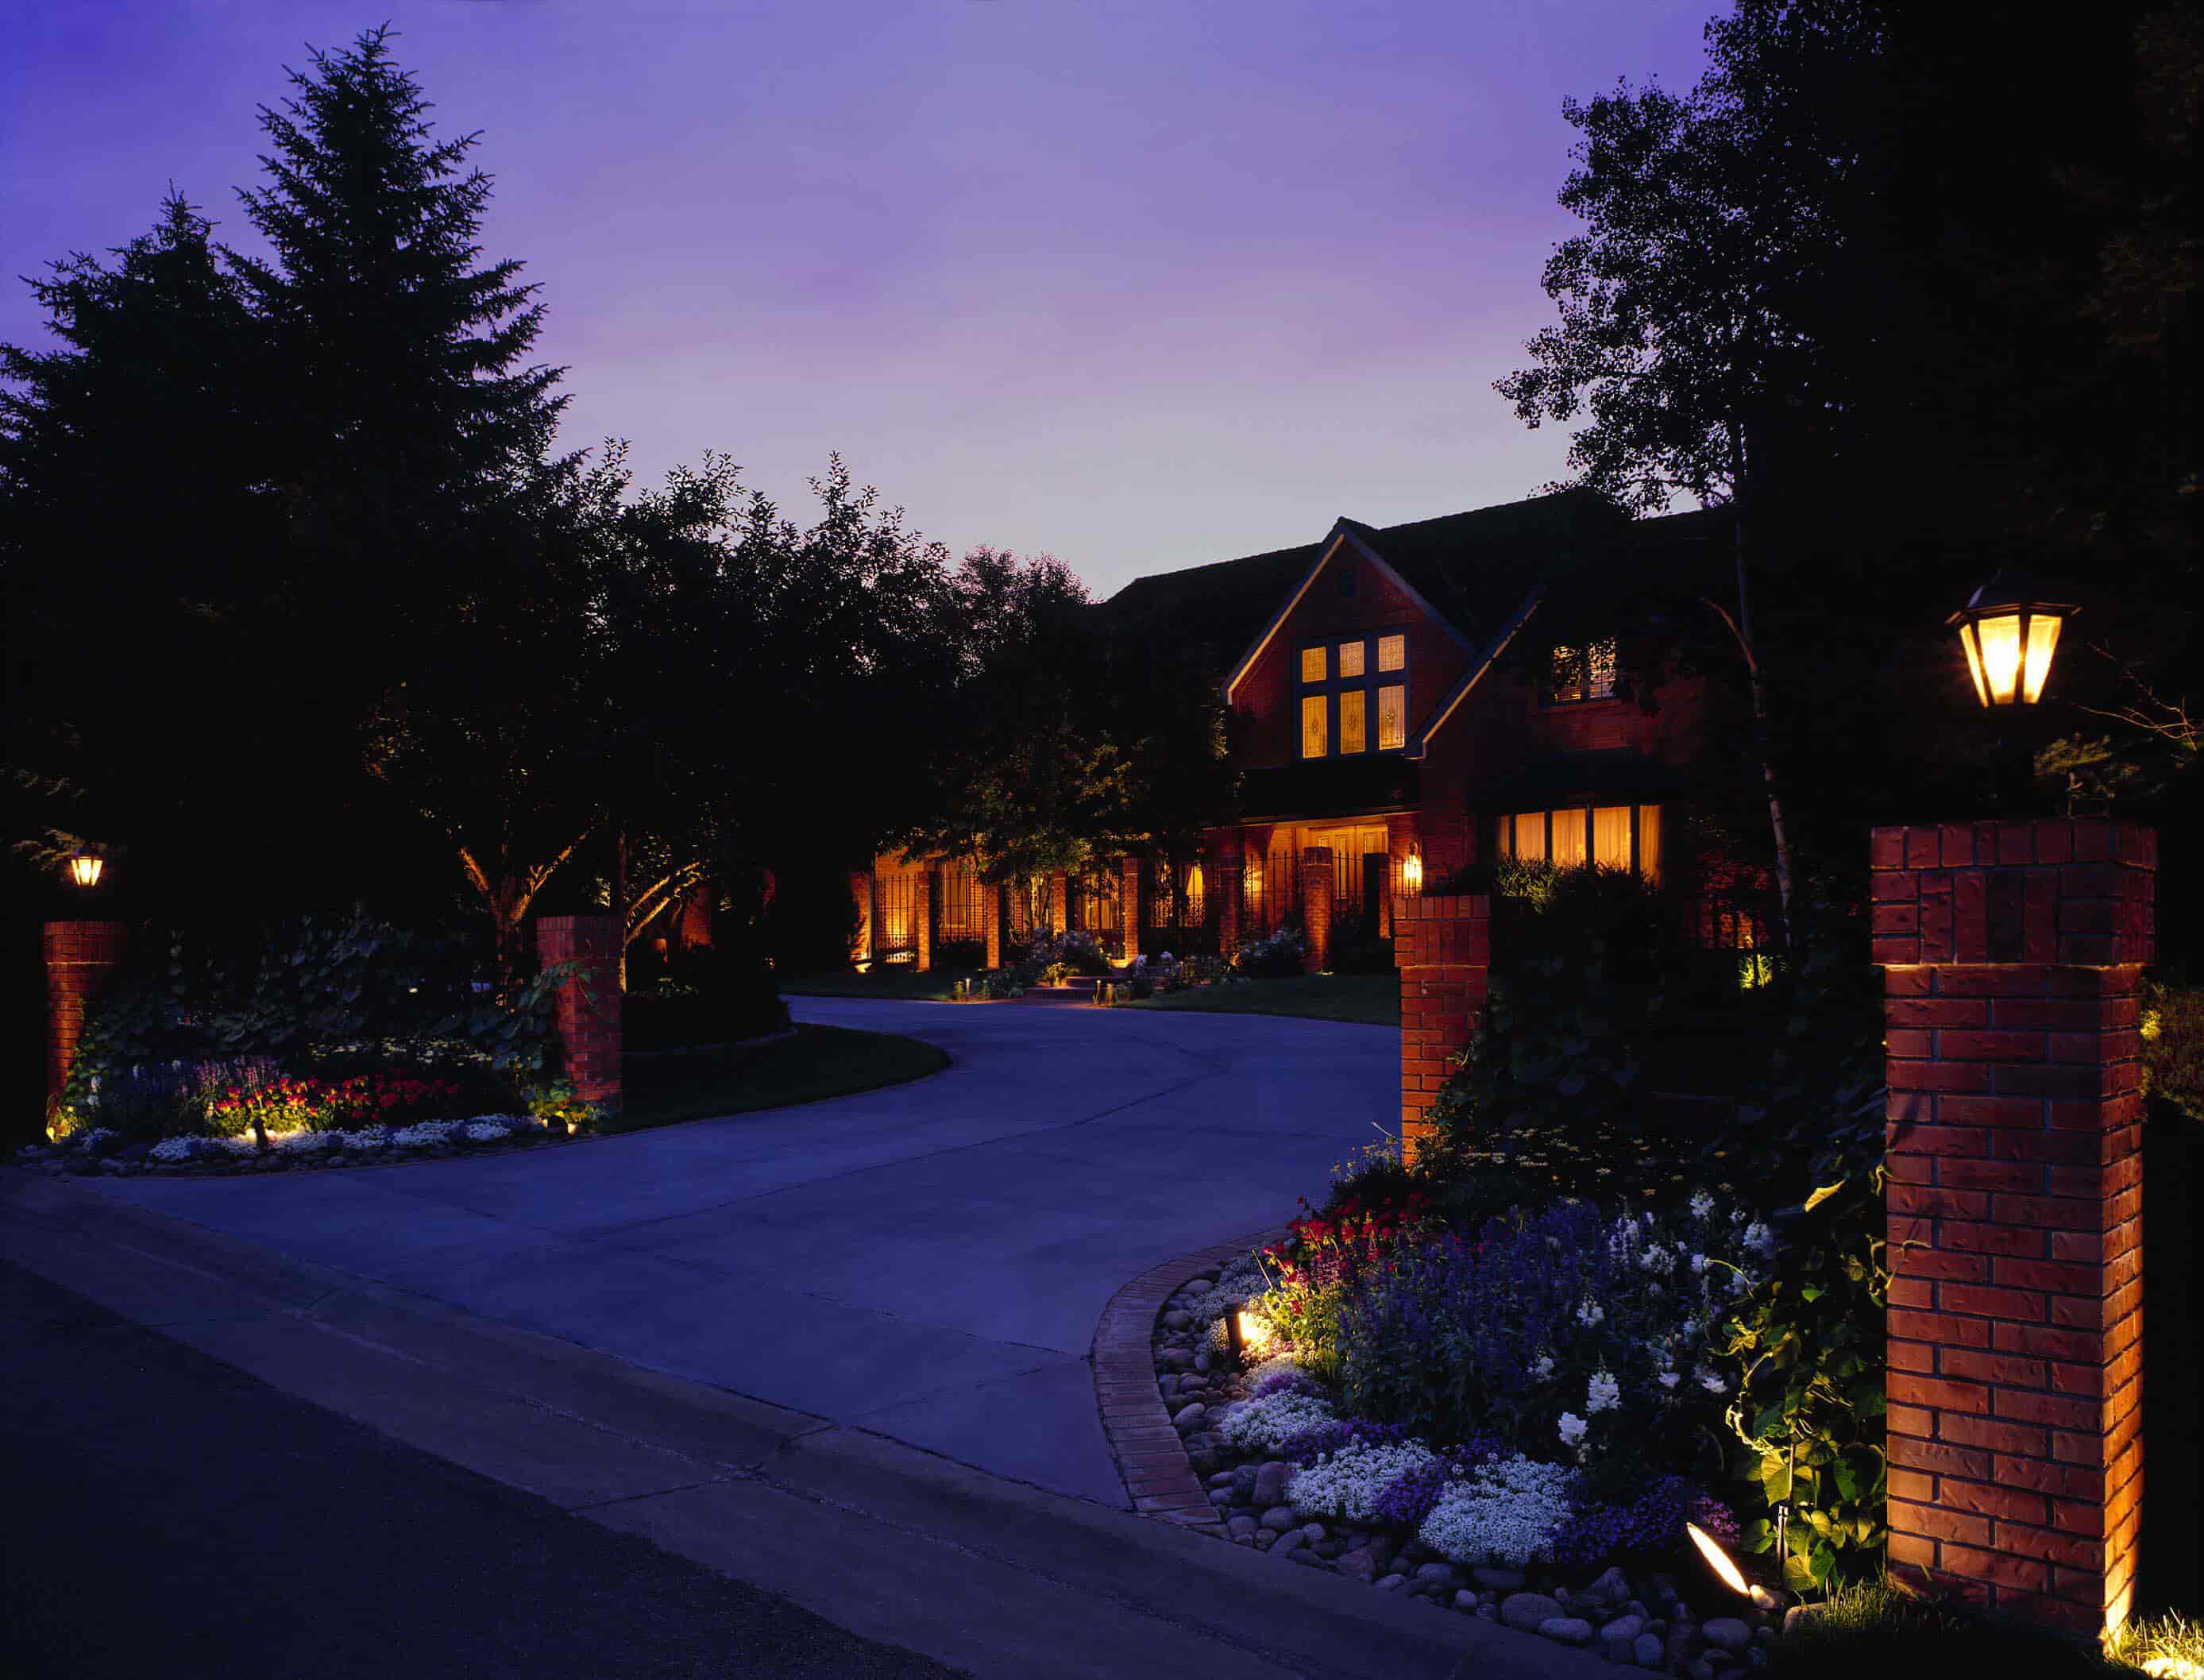 driveway lit by outdoor lighting